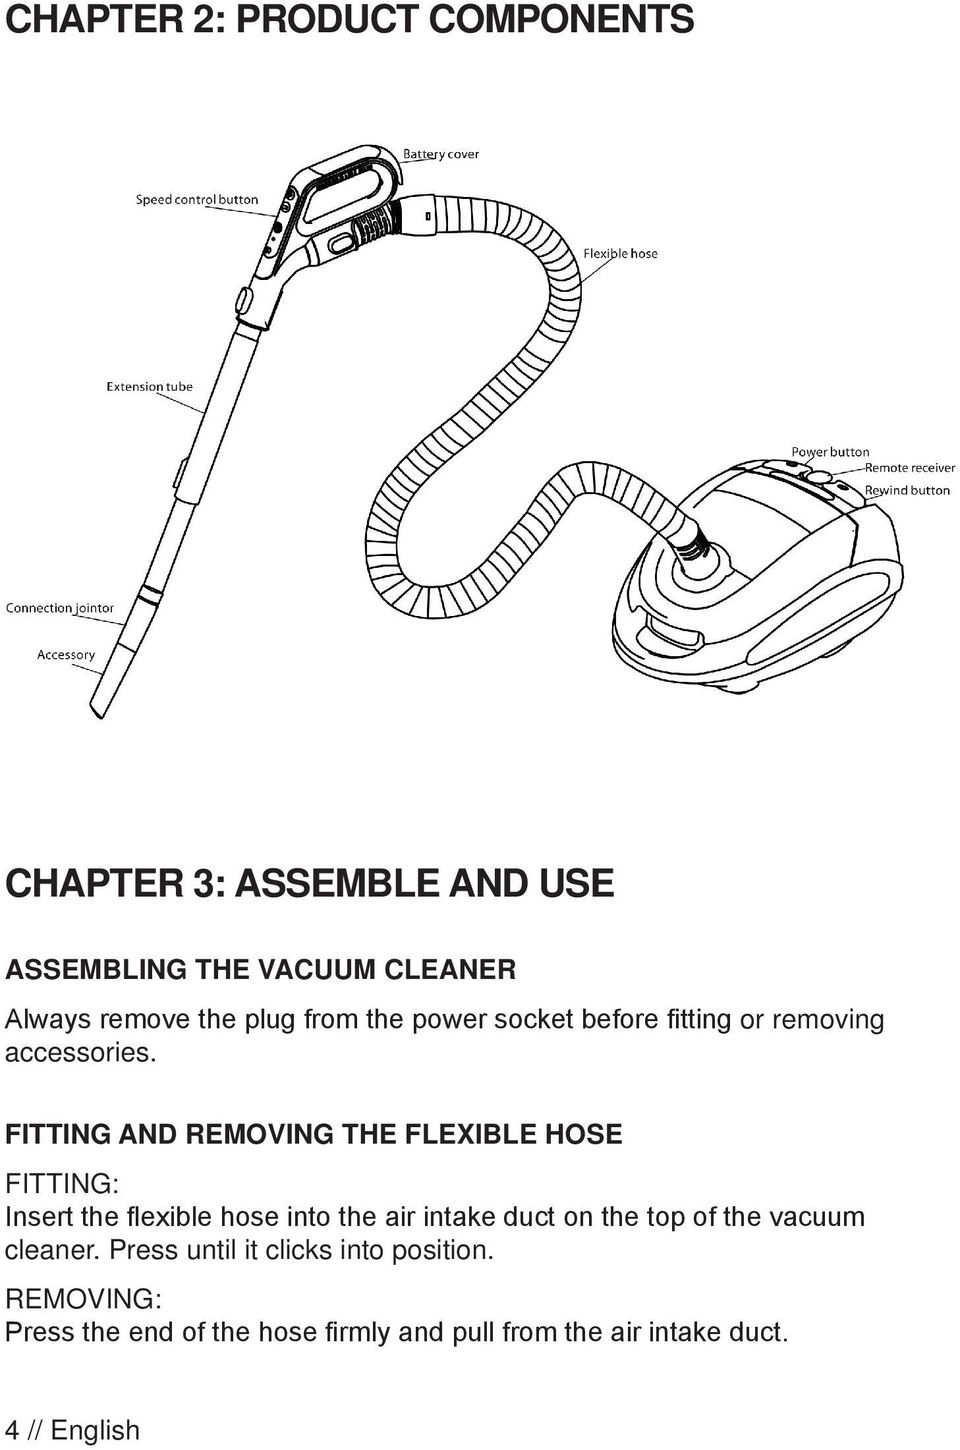 Fitting and removing the flexible hose Fitting: Insert the flexible hose into the air intake duct on the